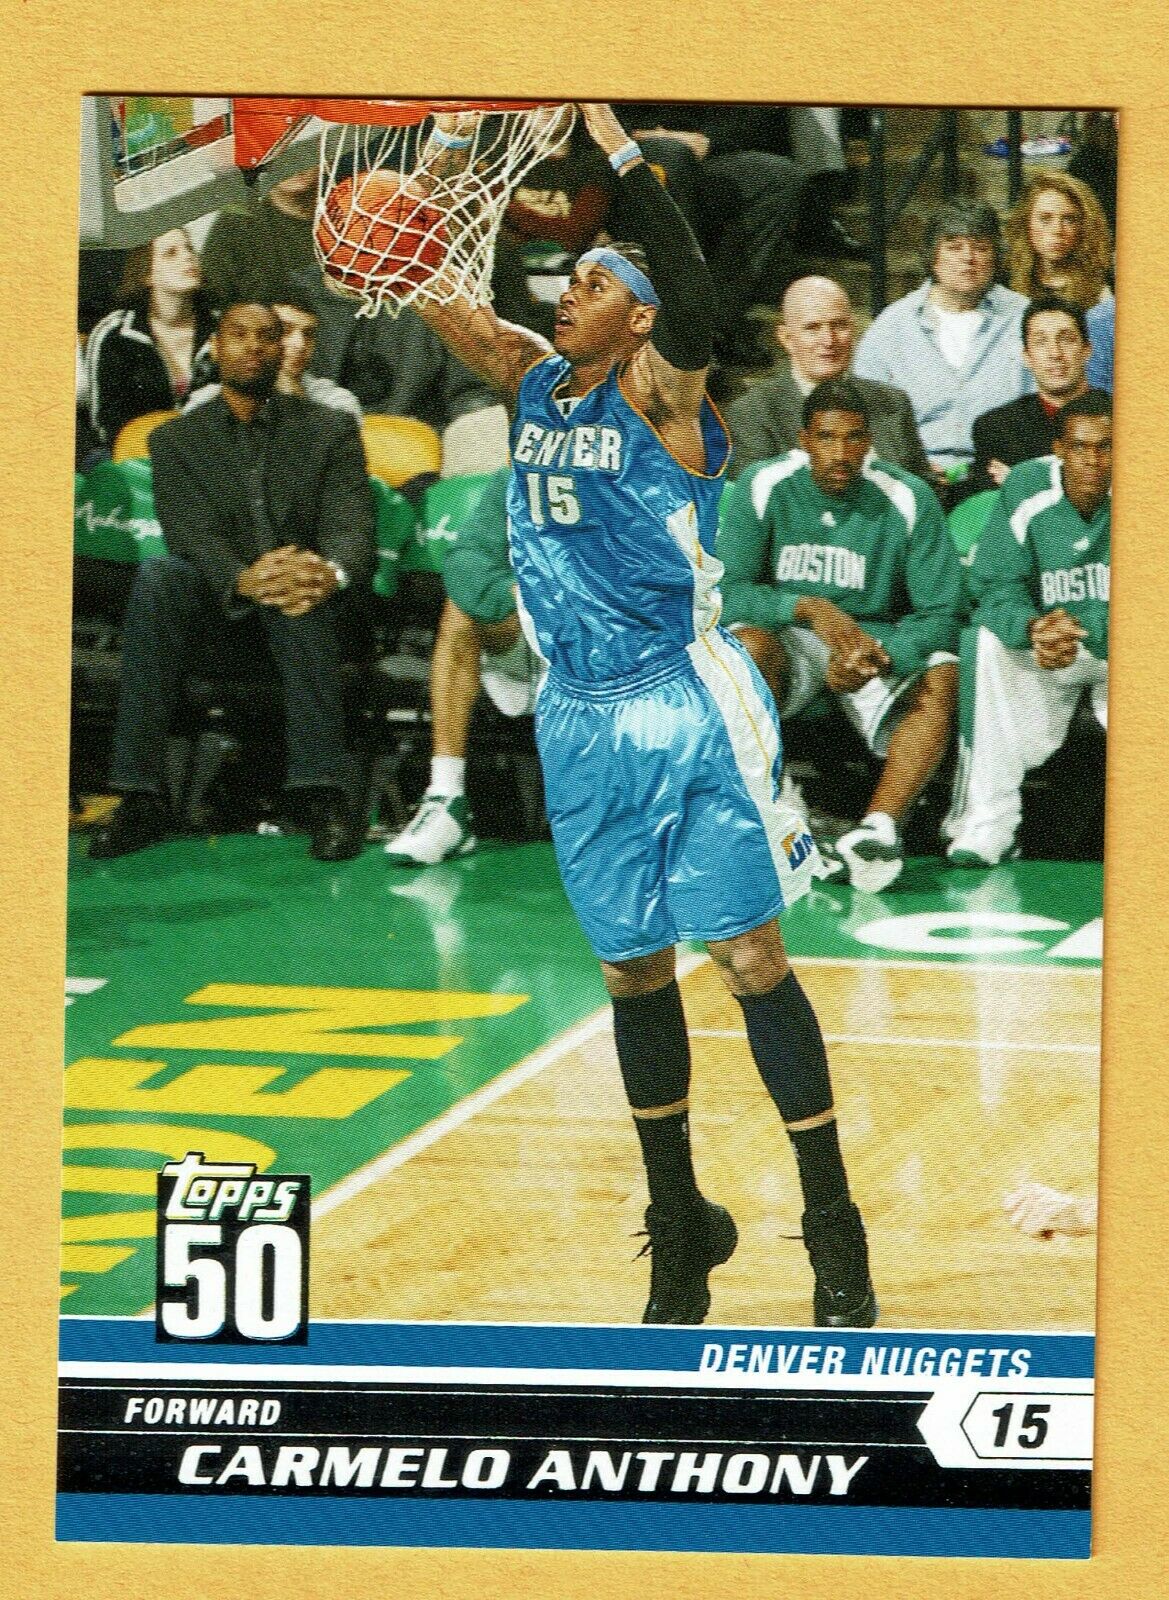 Carmelo Anthony 2007 2008 Topps 50th Anniversary Series Mint Card